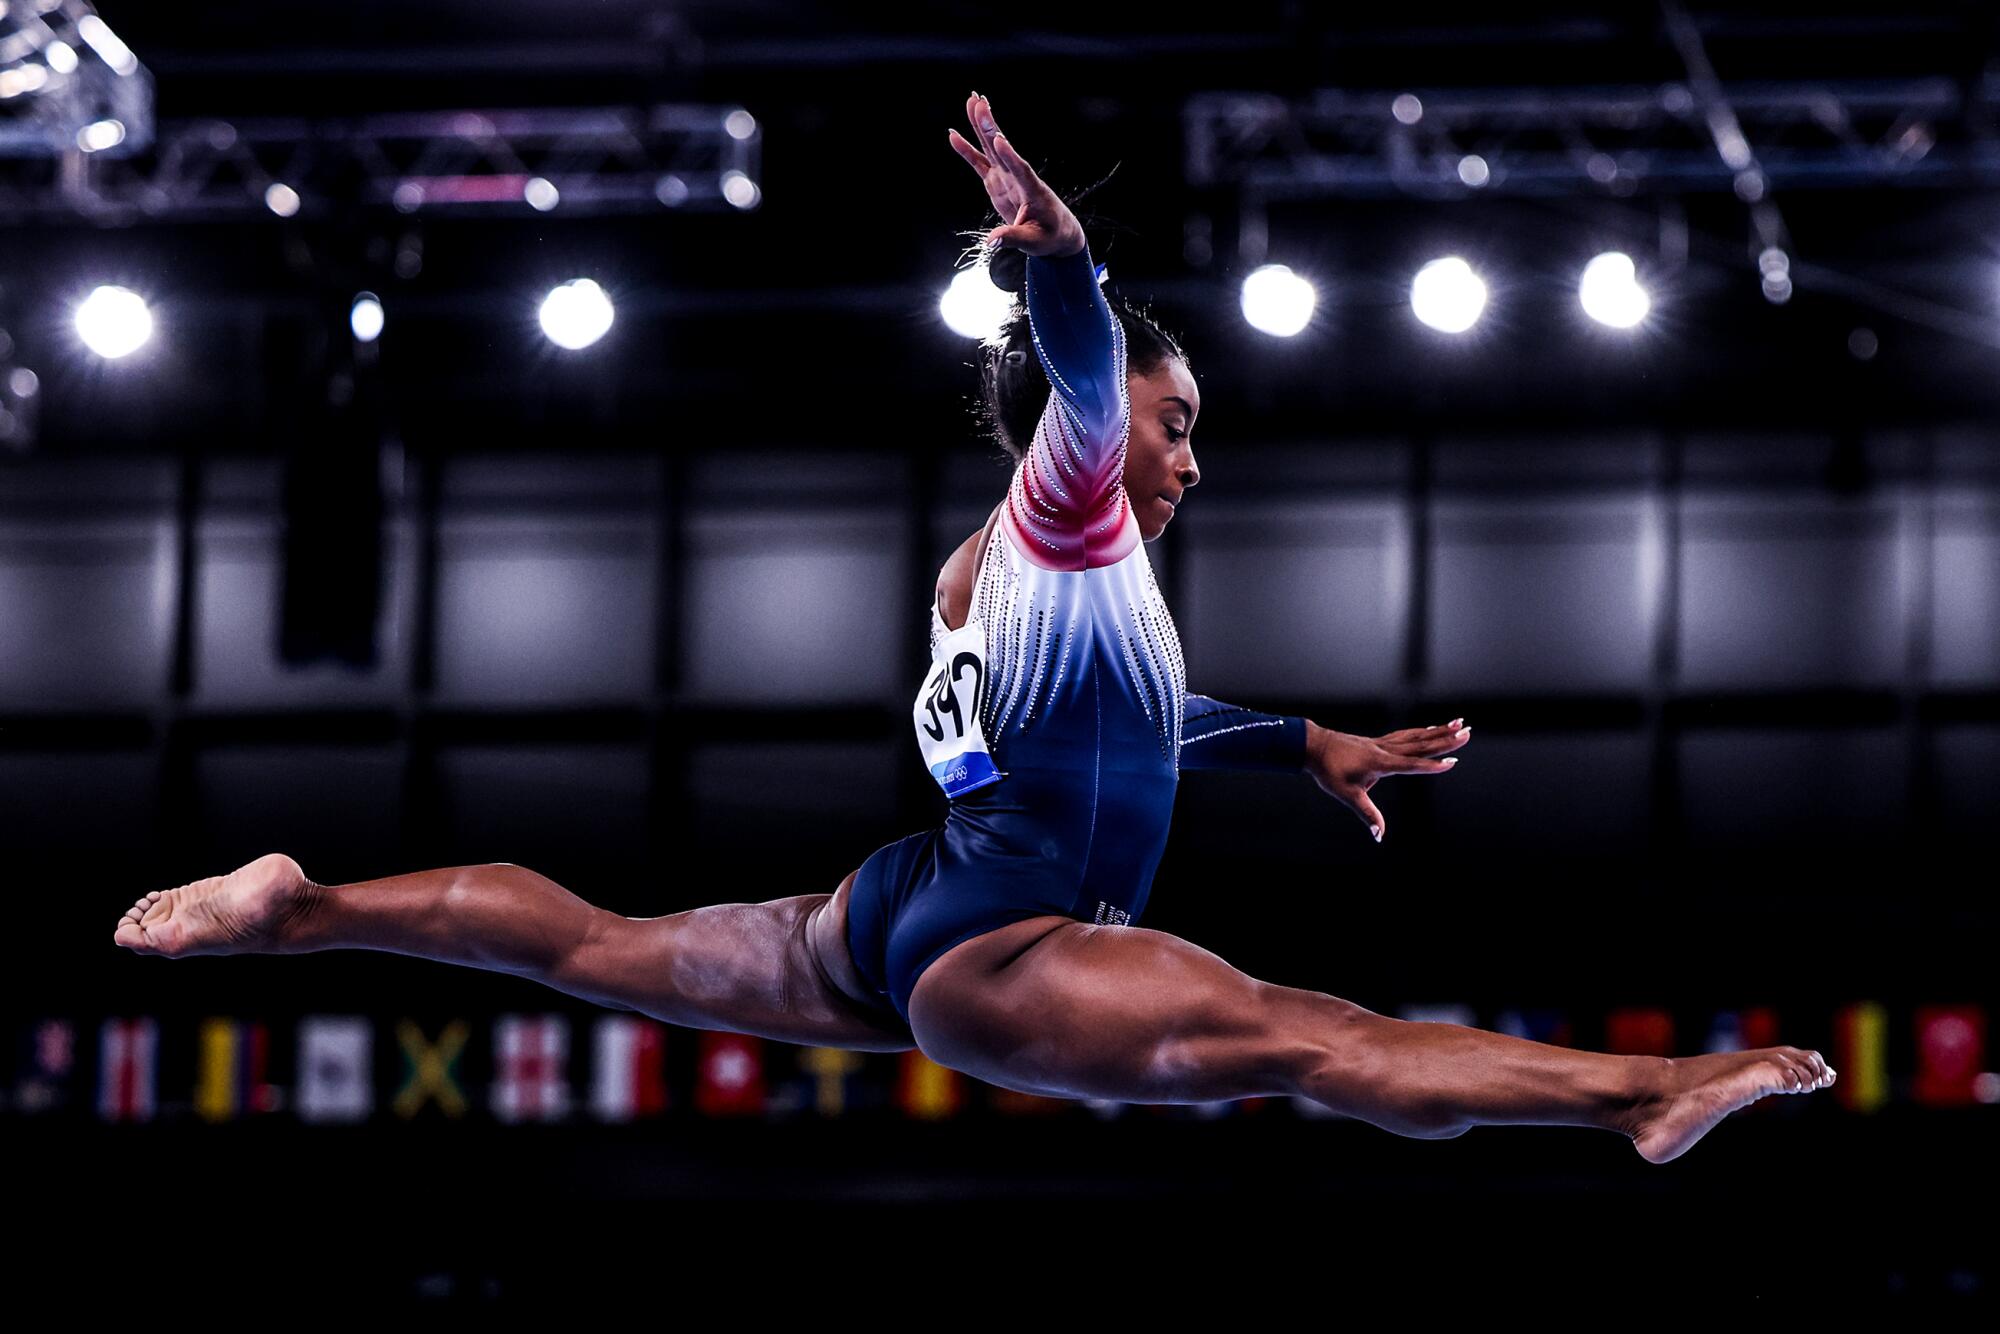 Simone Biles' hands and feet on the uneven bars